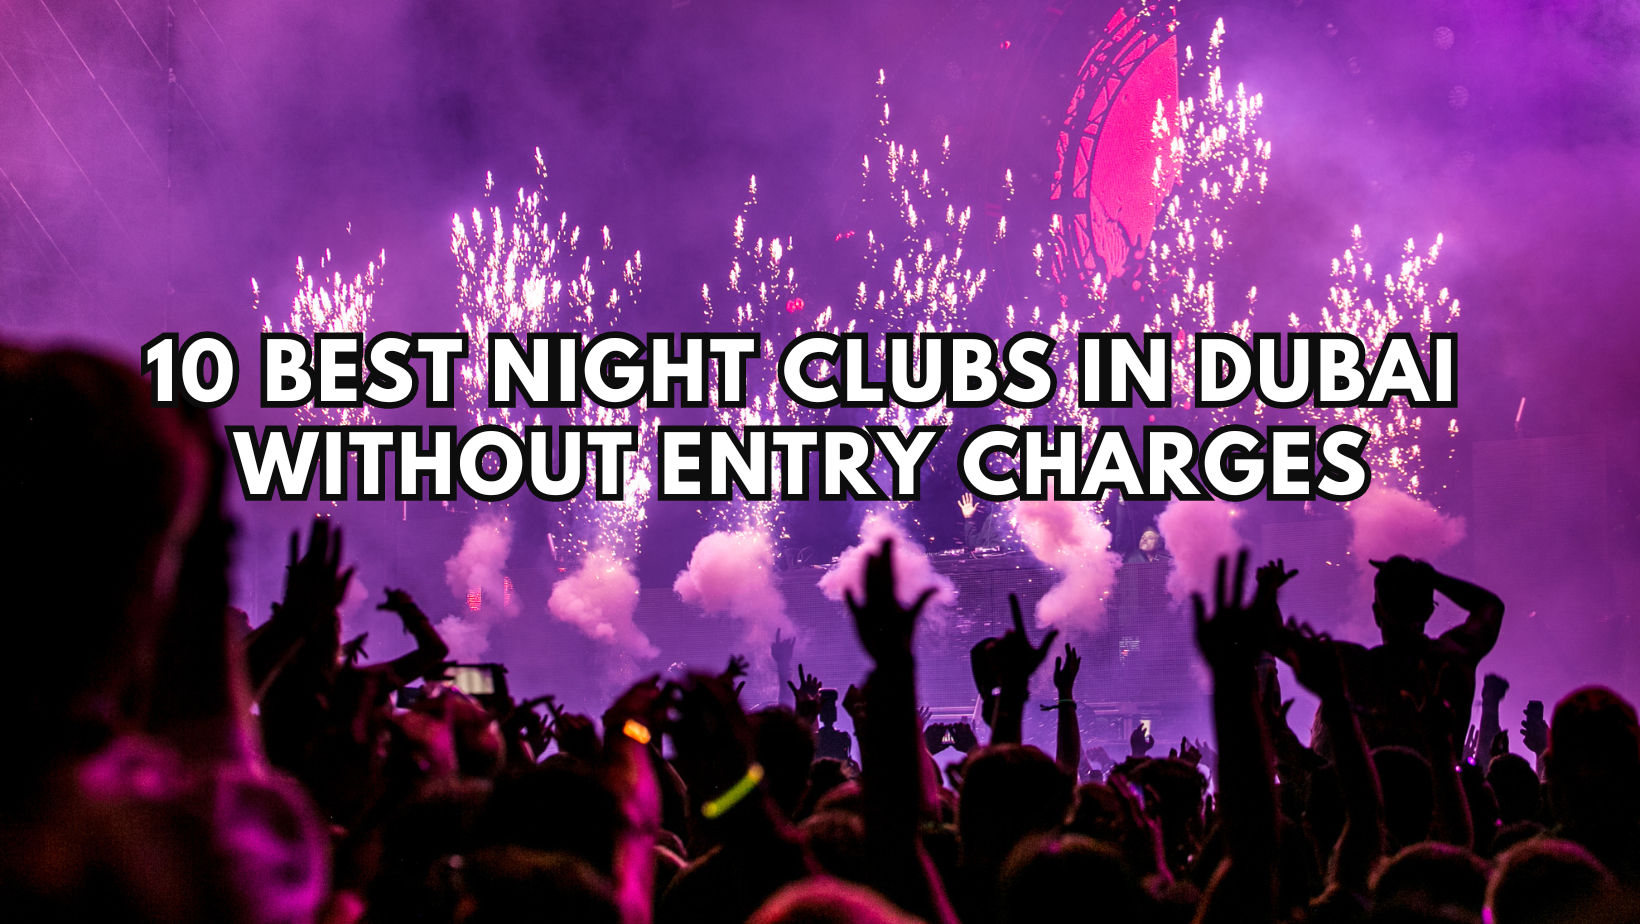 Night Clubs in Dubai without Entry Charges